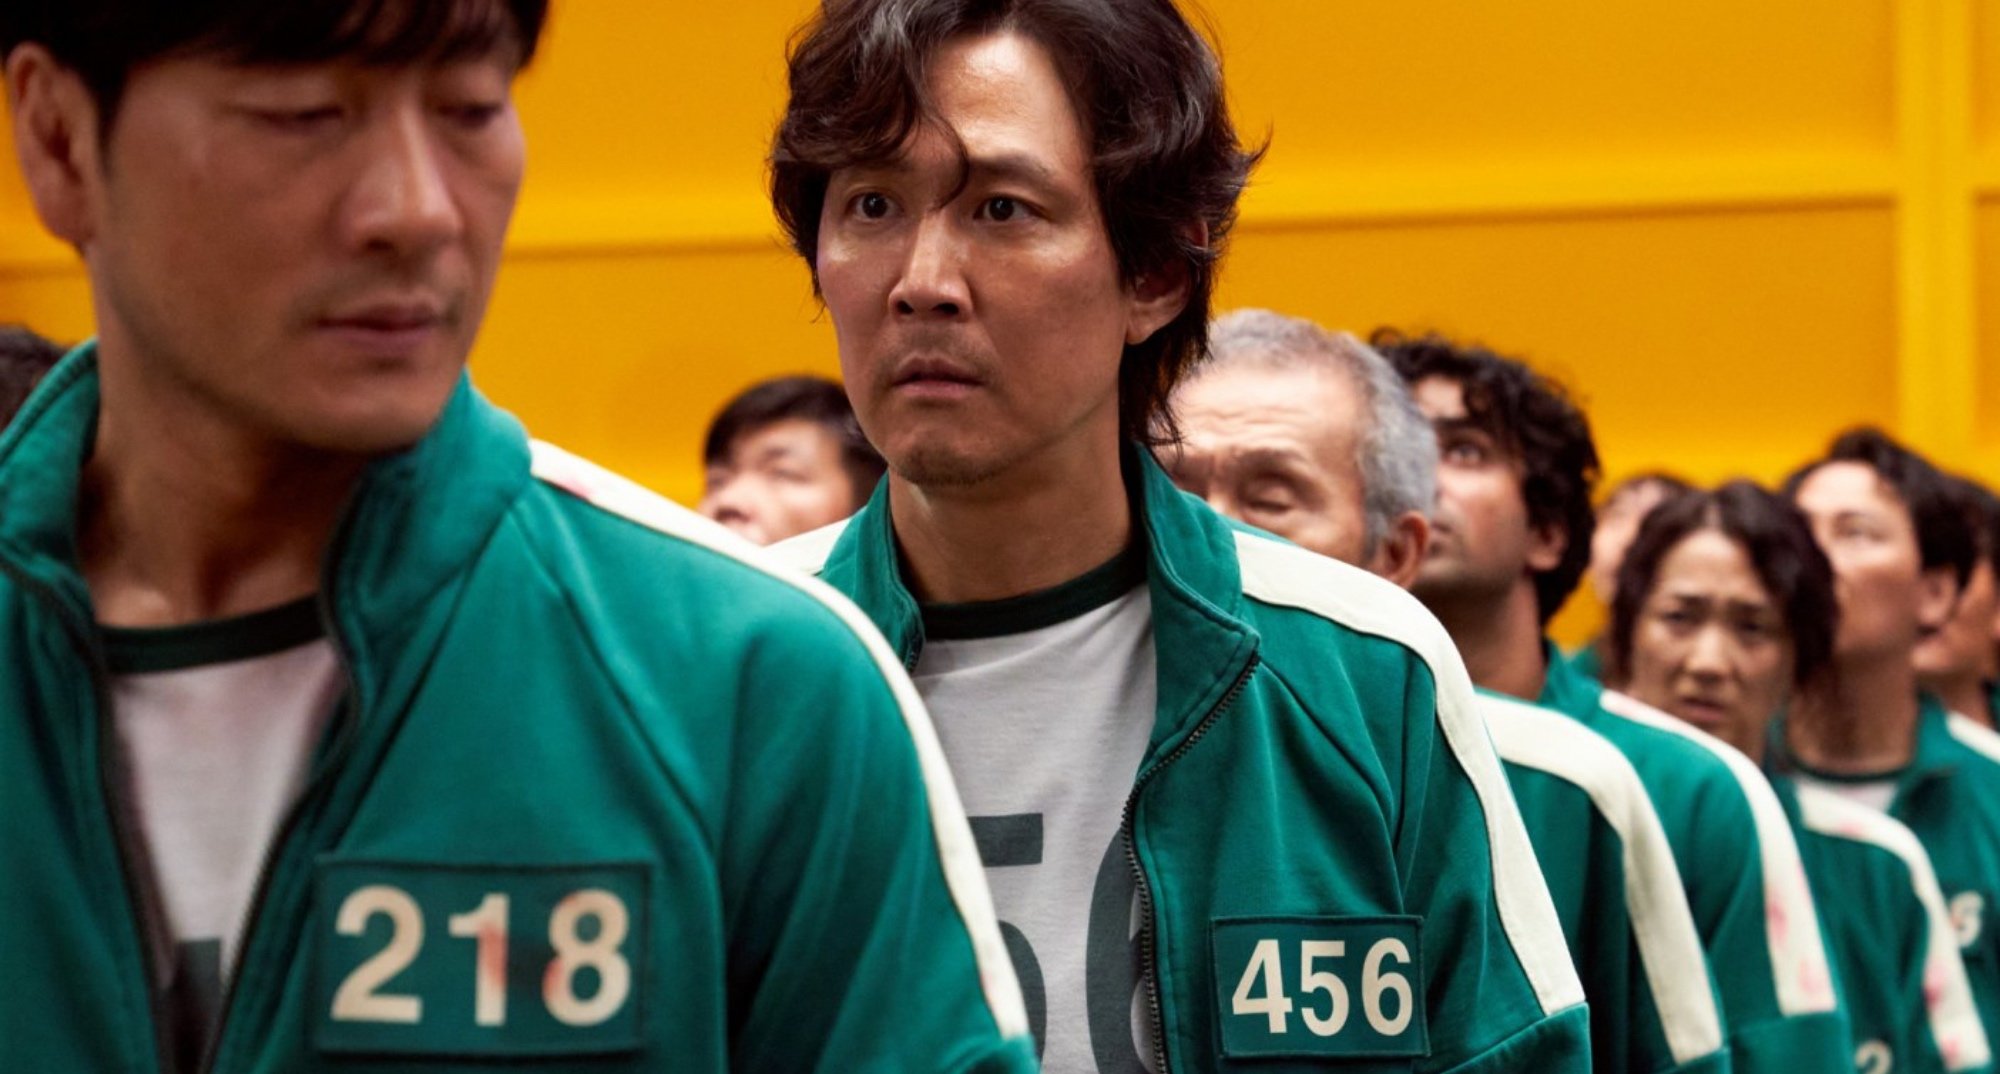 Sang-woo and Gi-hun in 'Squid Game' wearing numbered player jackets.